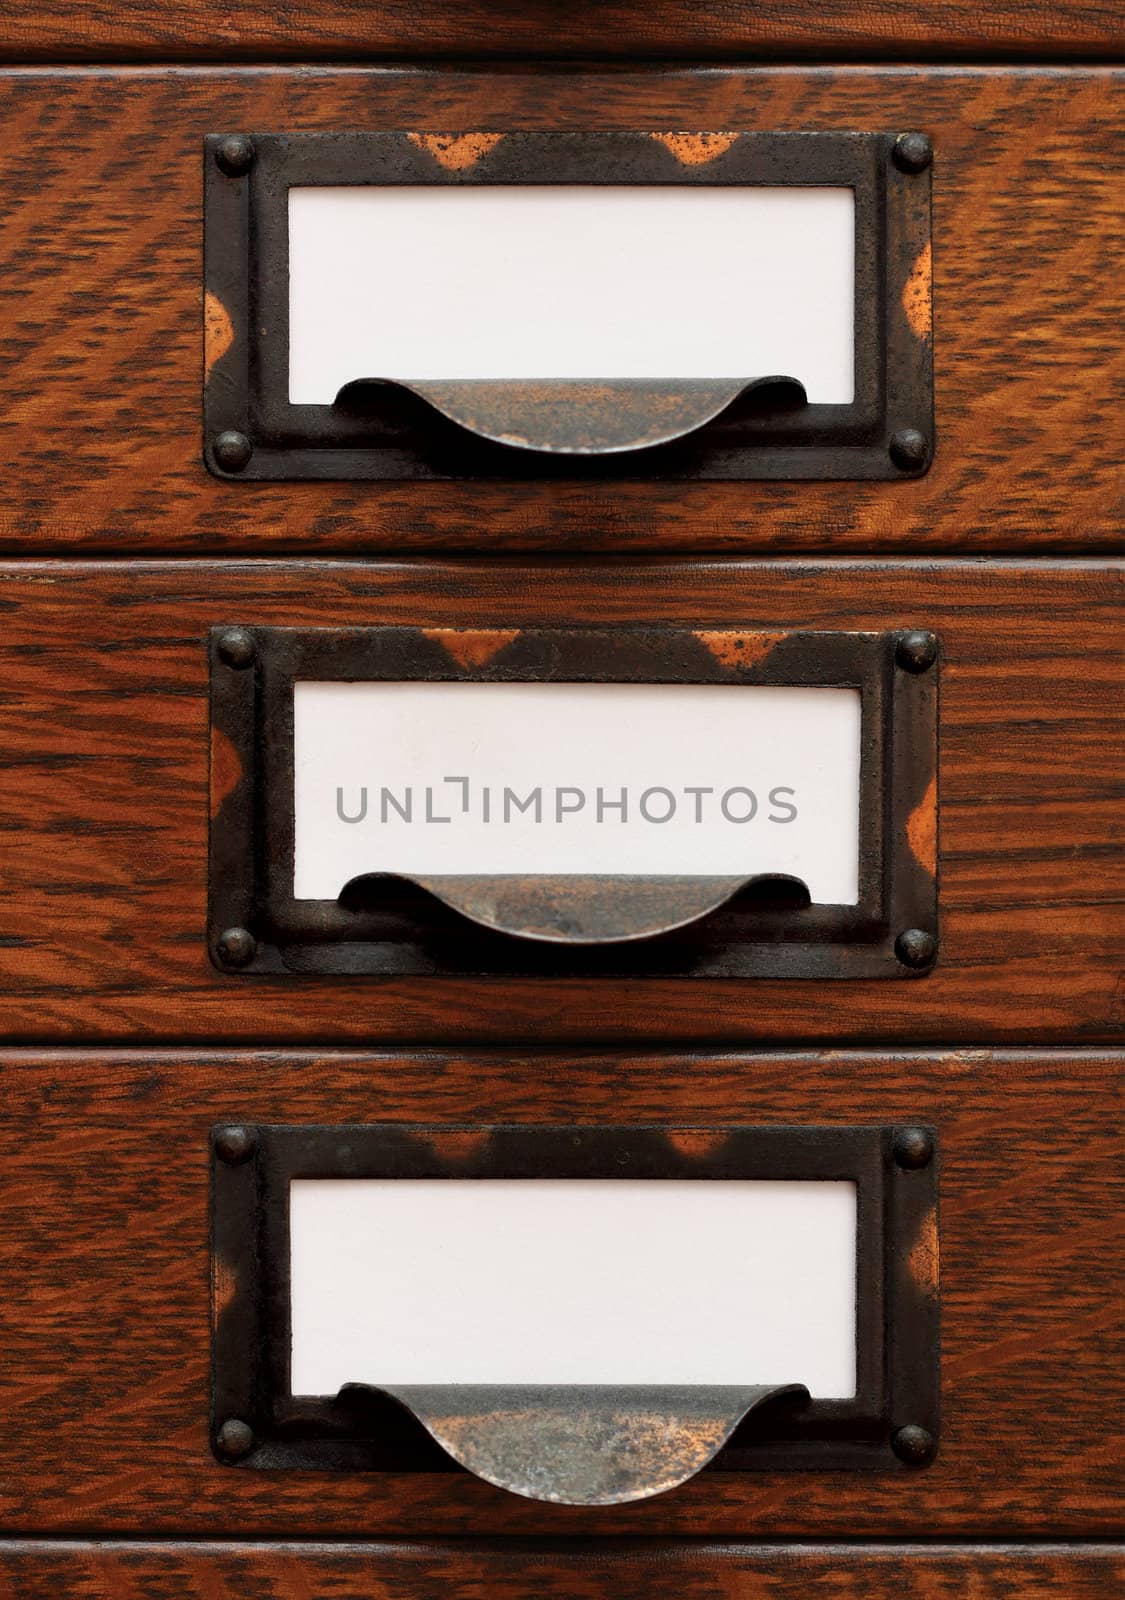 Old File Drawers With Blank Labels by Em3